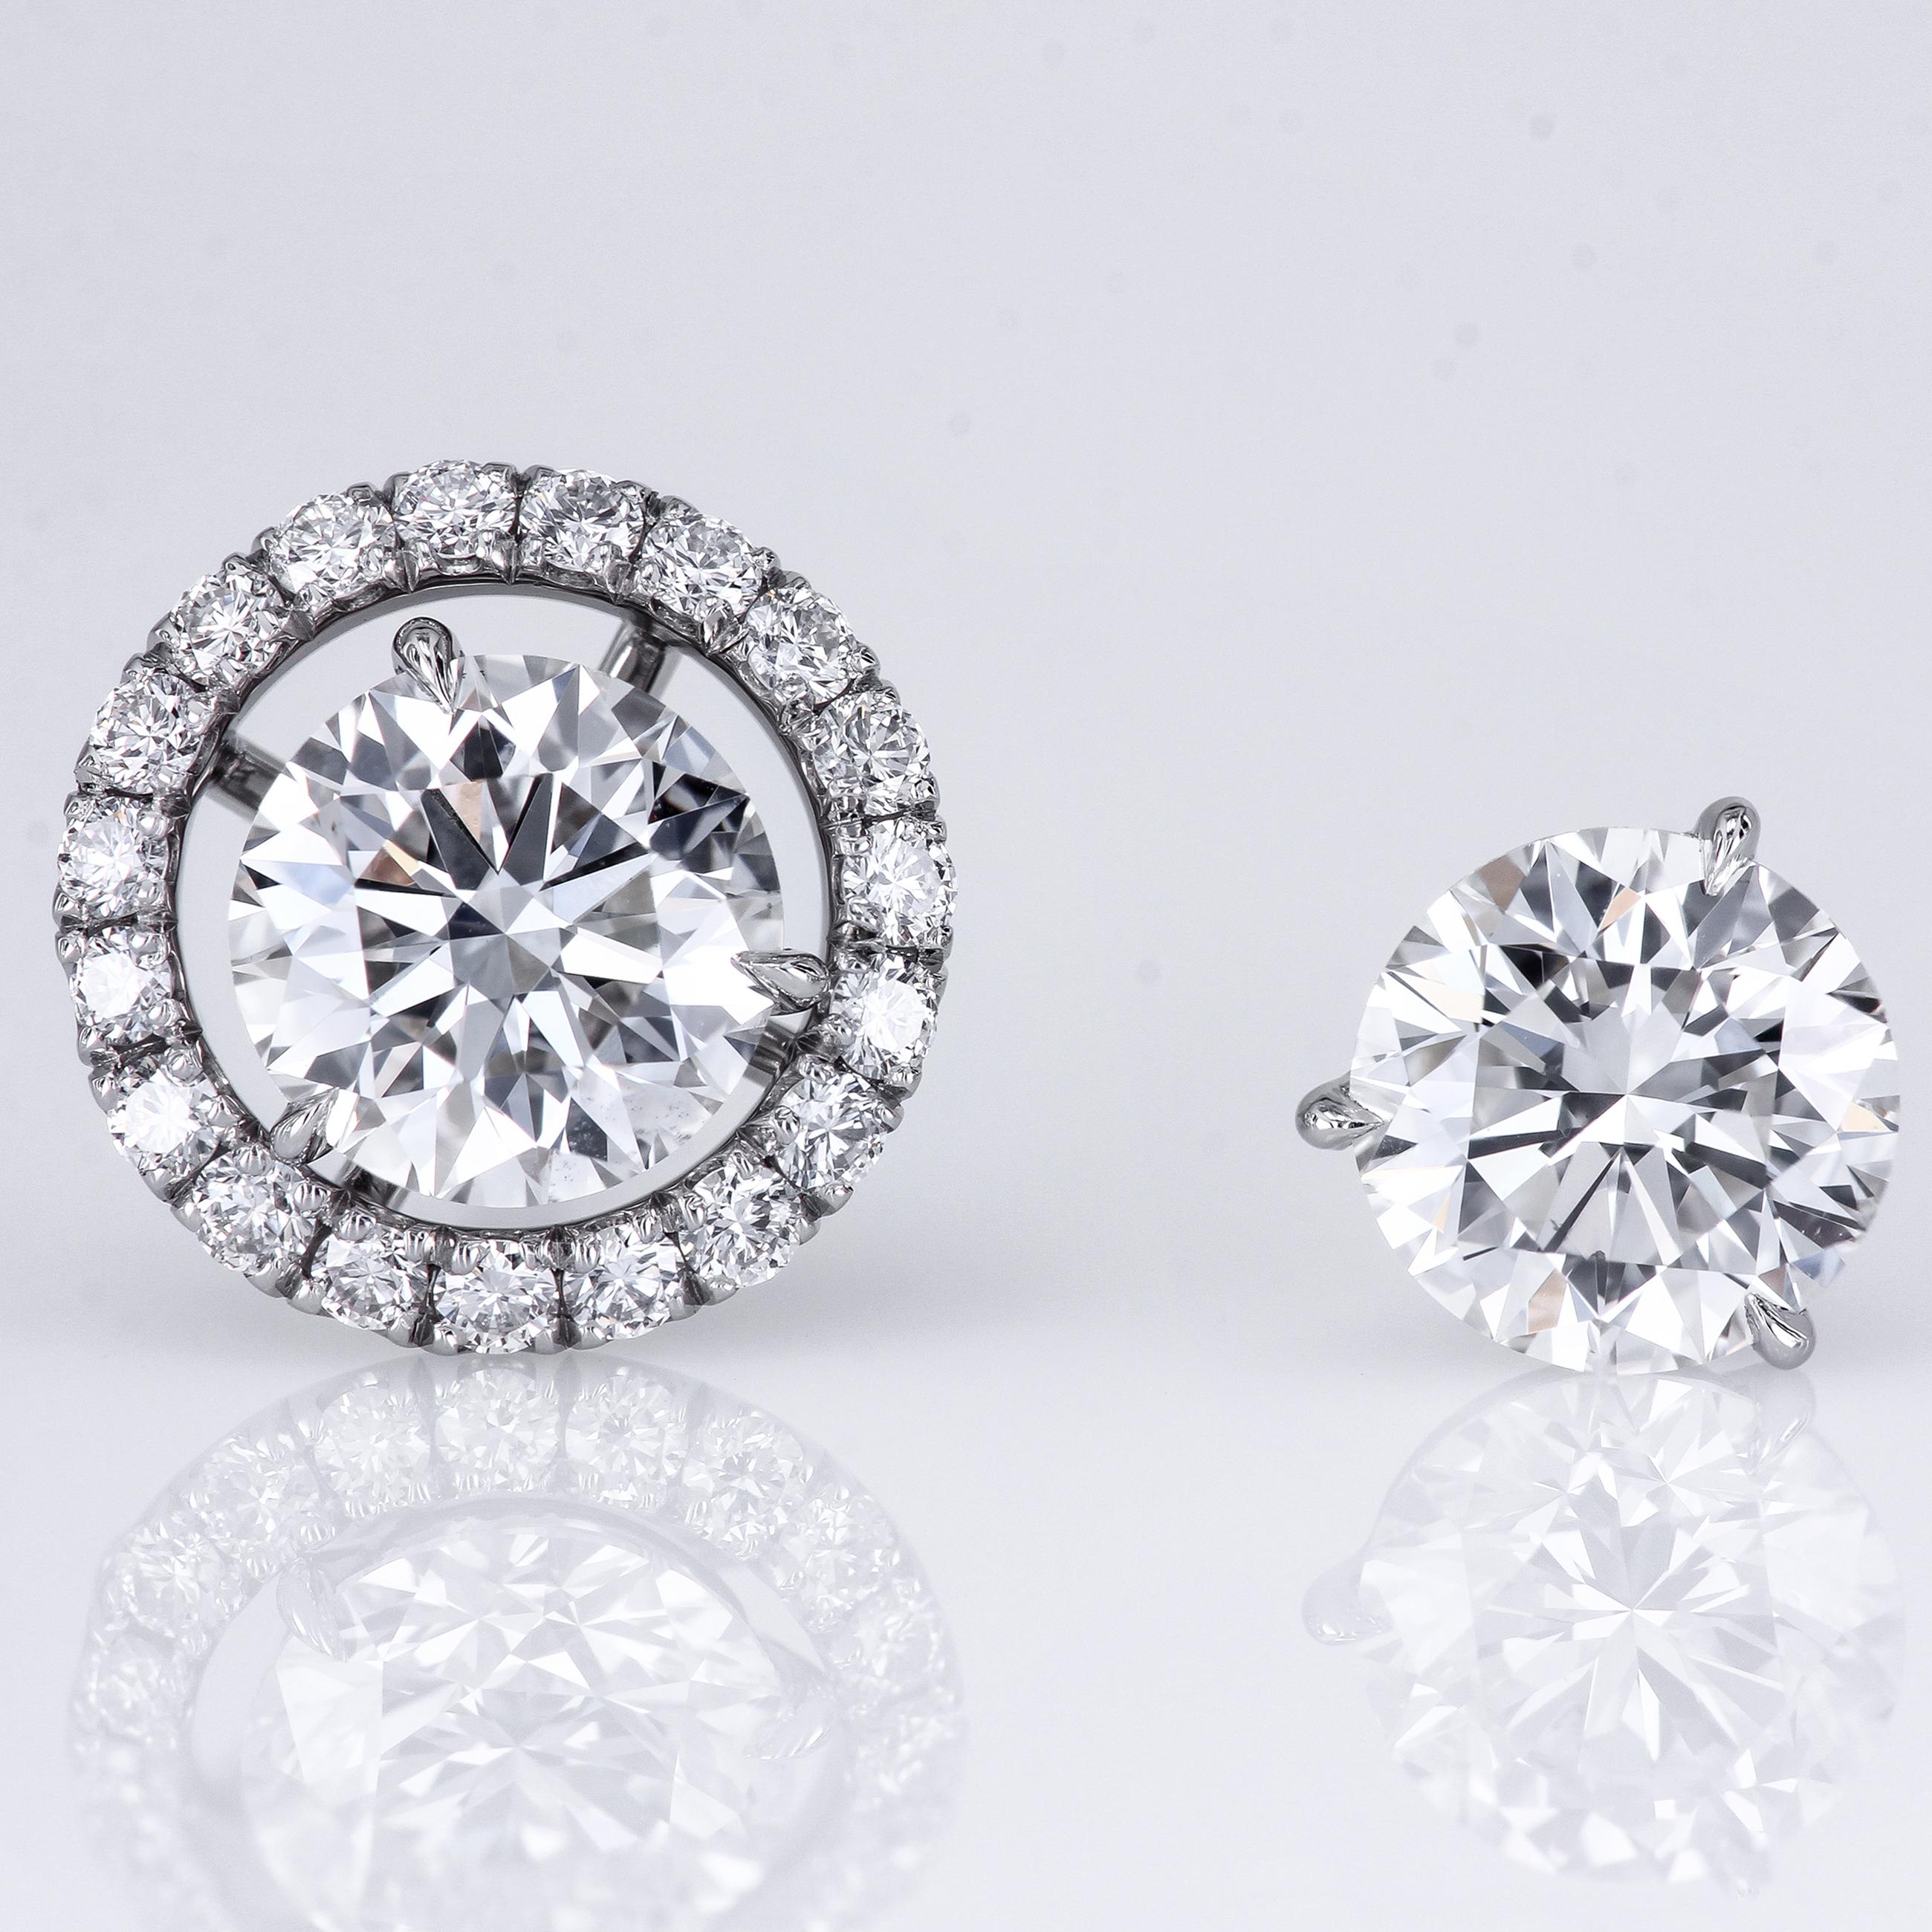 Leon Mege classic three-prong martini studs in platinum with removable micro-pave diamond jackets.

A pair of GIA-certified round diamonds 1.18 carats total weight: 
0.59 ct G/VS2 GIA #17384570
0.59 ct G/VS2;GIA #17376757

Studs are 5.3 mm in